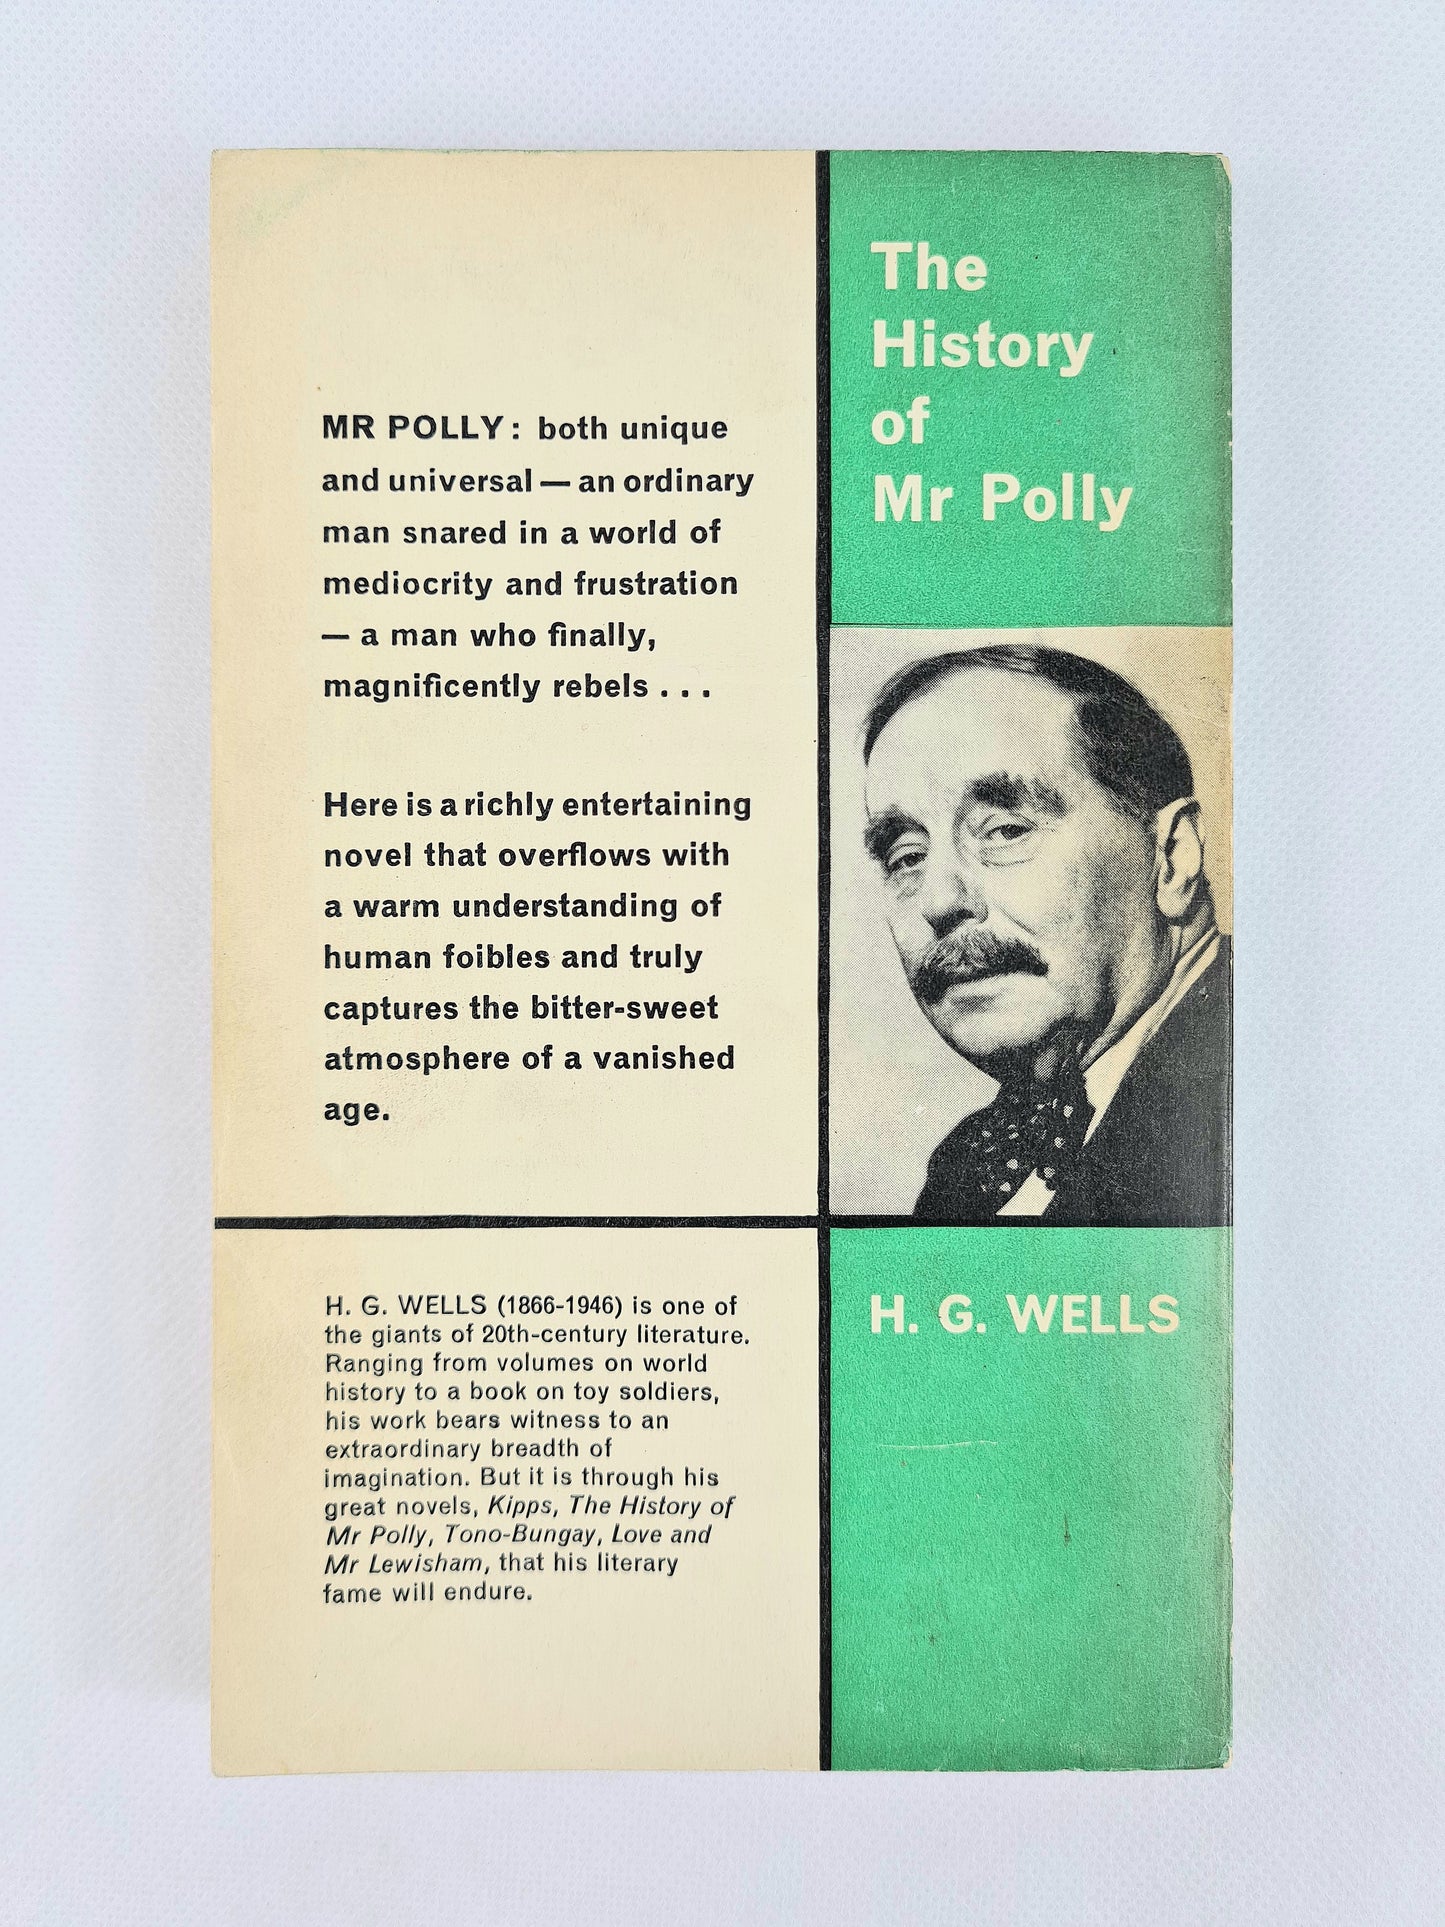 The History Of Mr Polly by H.G Wells. Vintage paperback book. Pan books